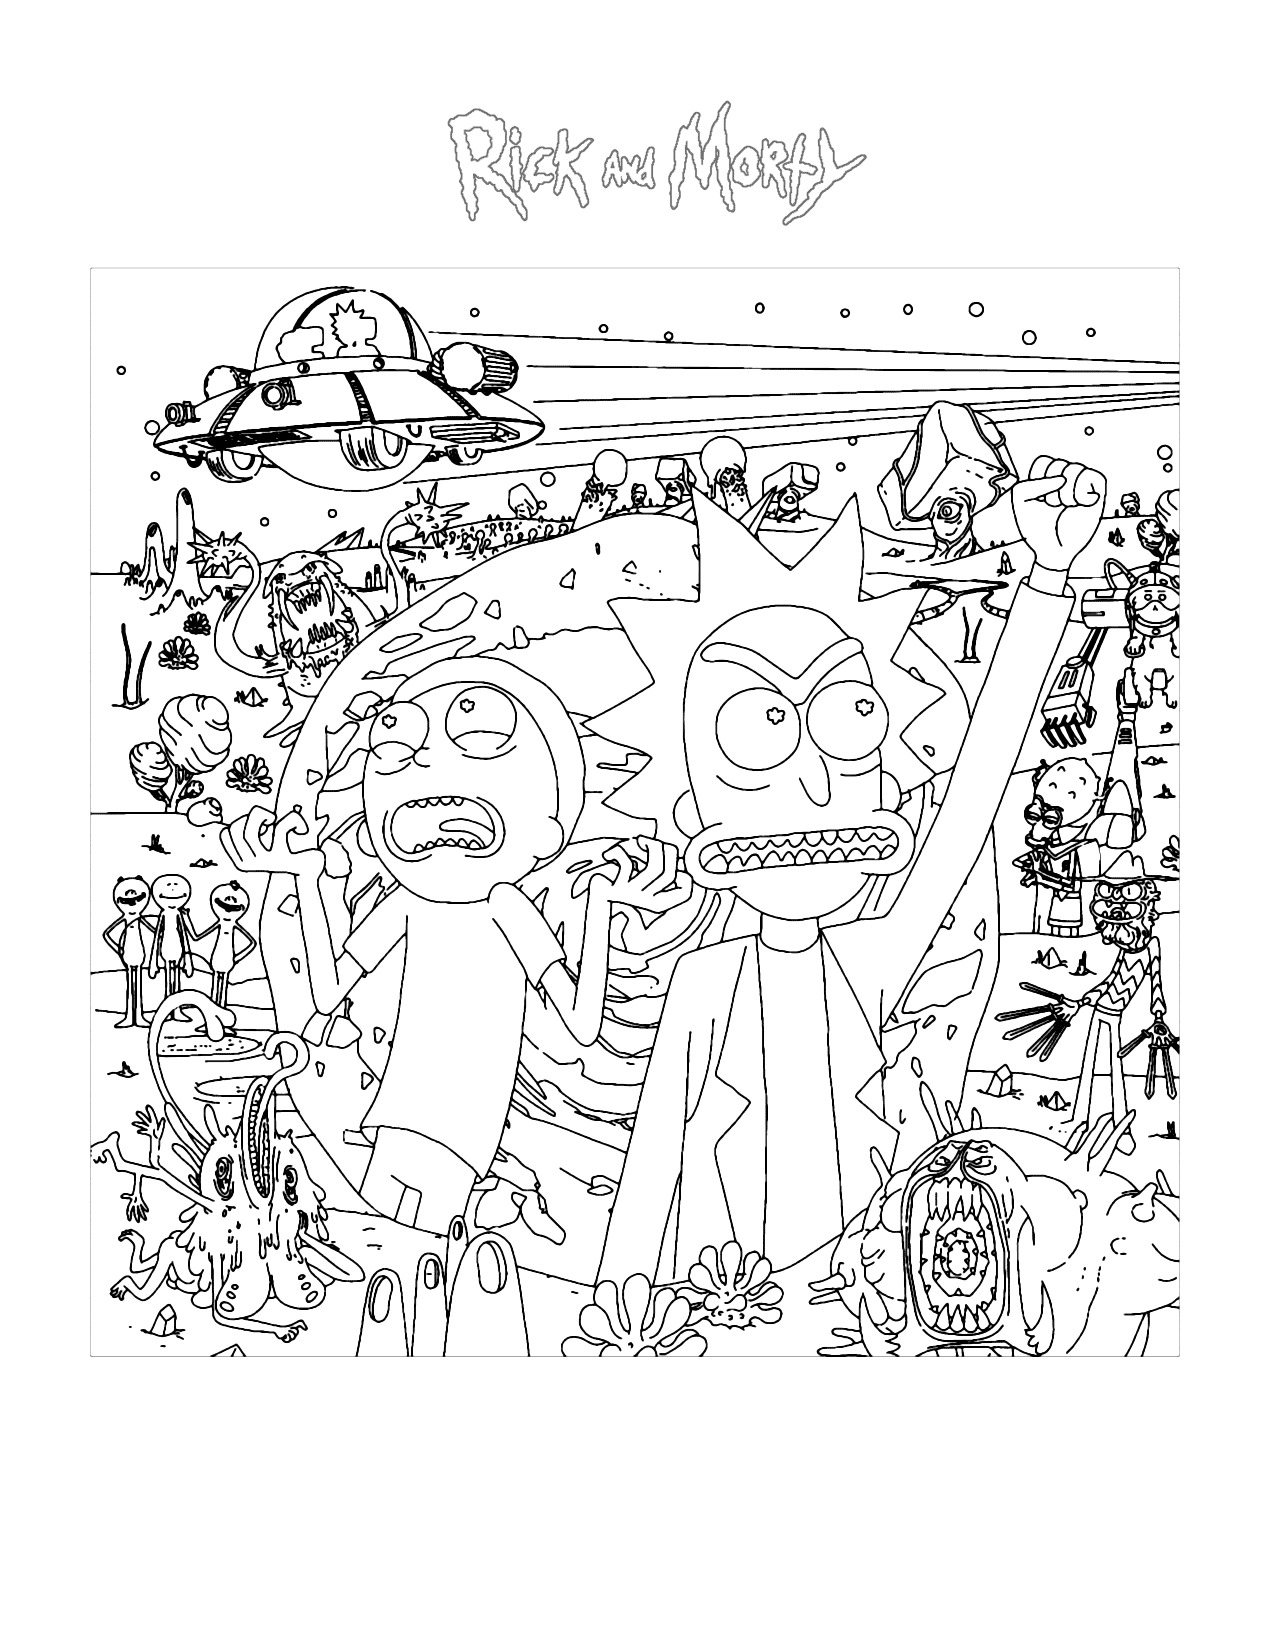 Rick And Morty Scenes Coloring Page